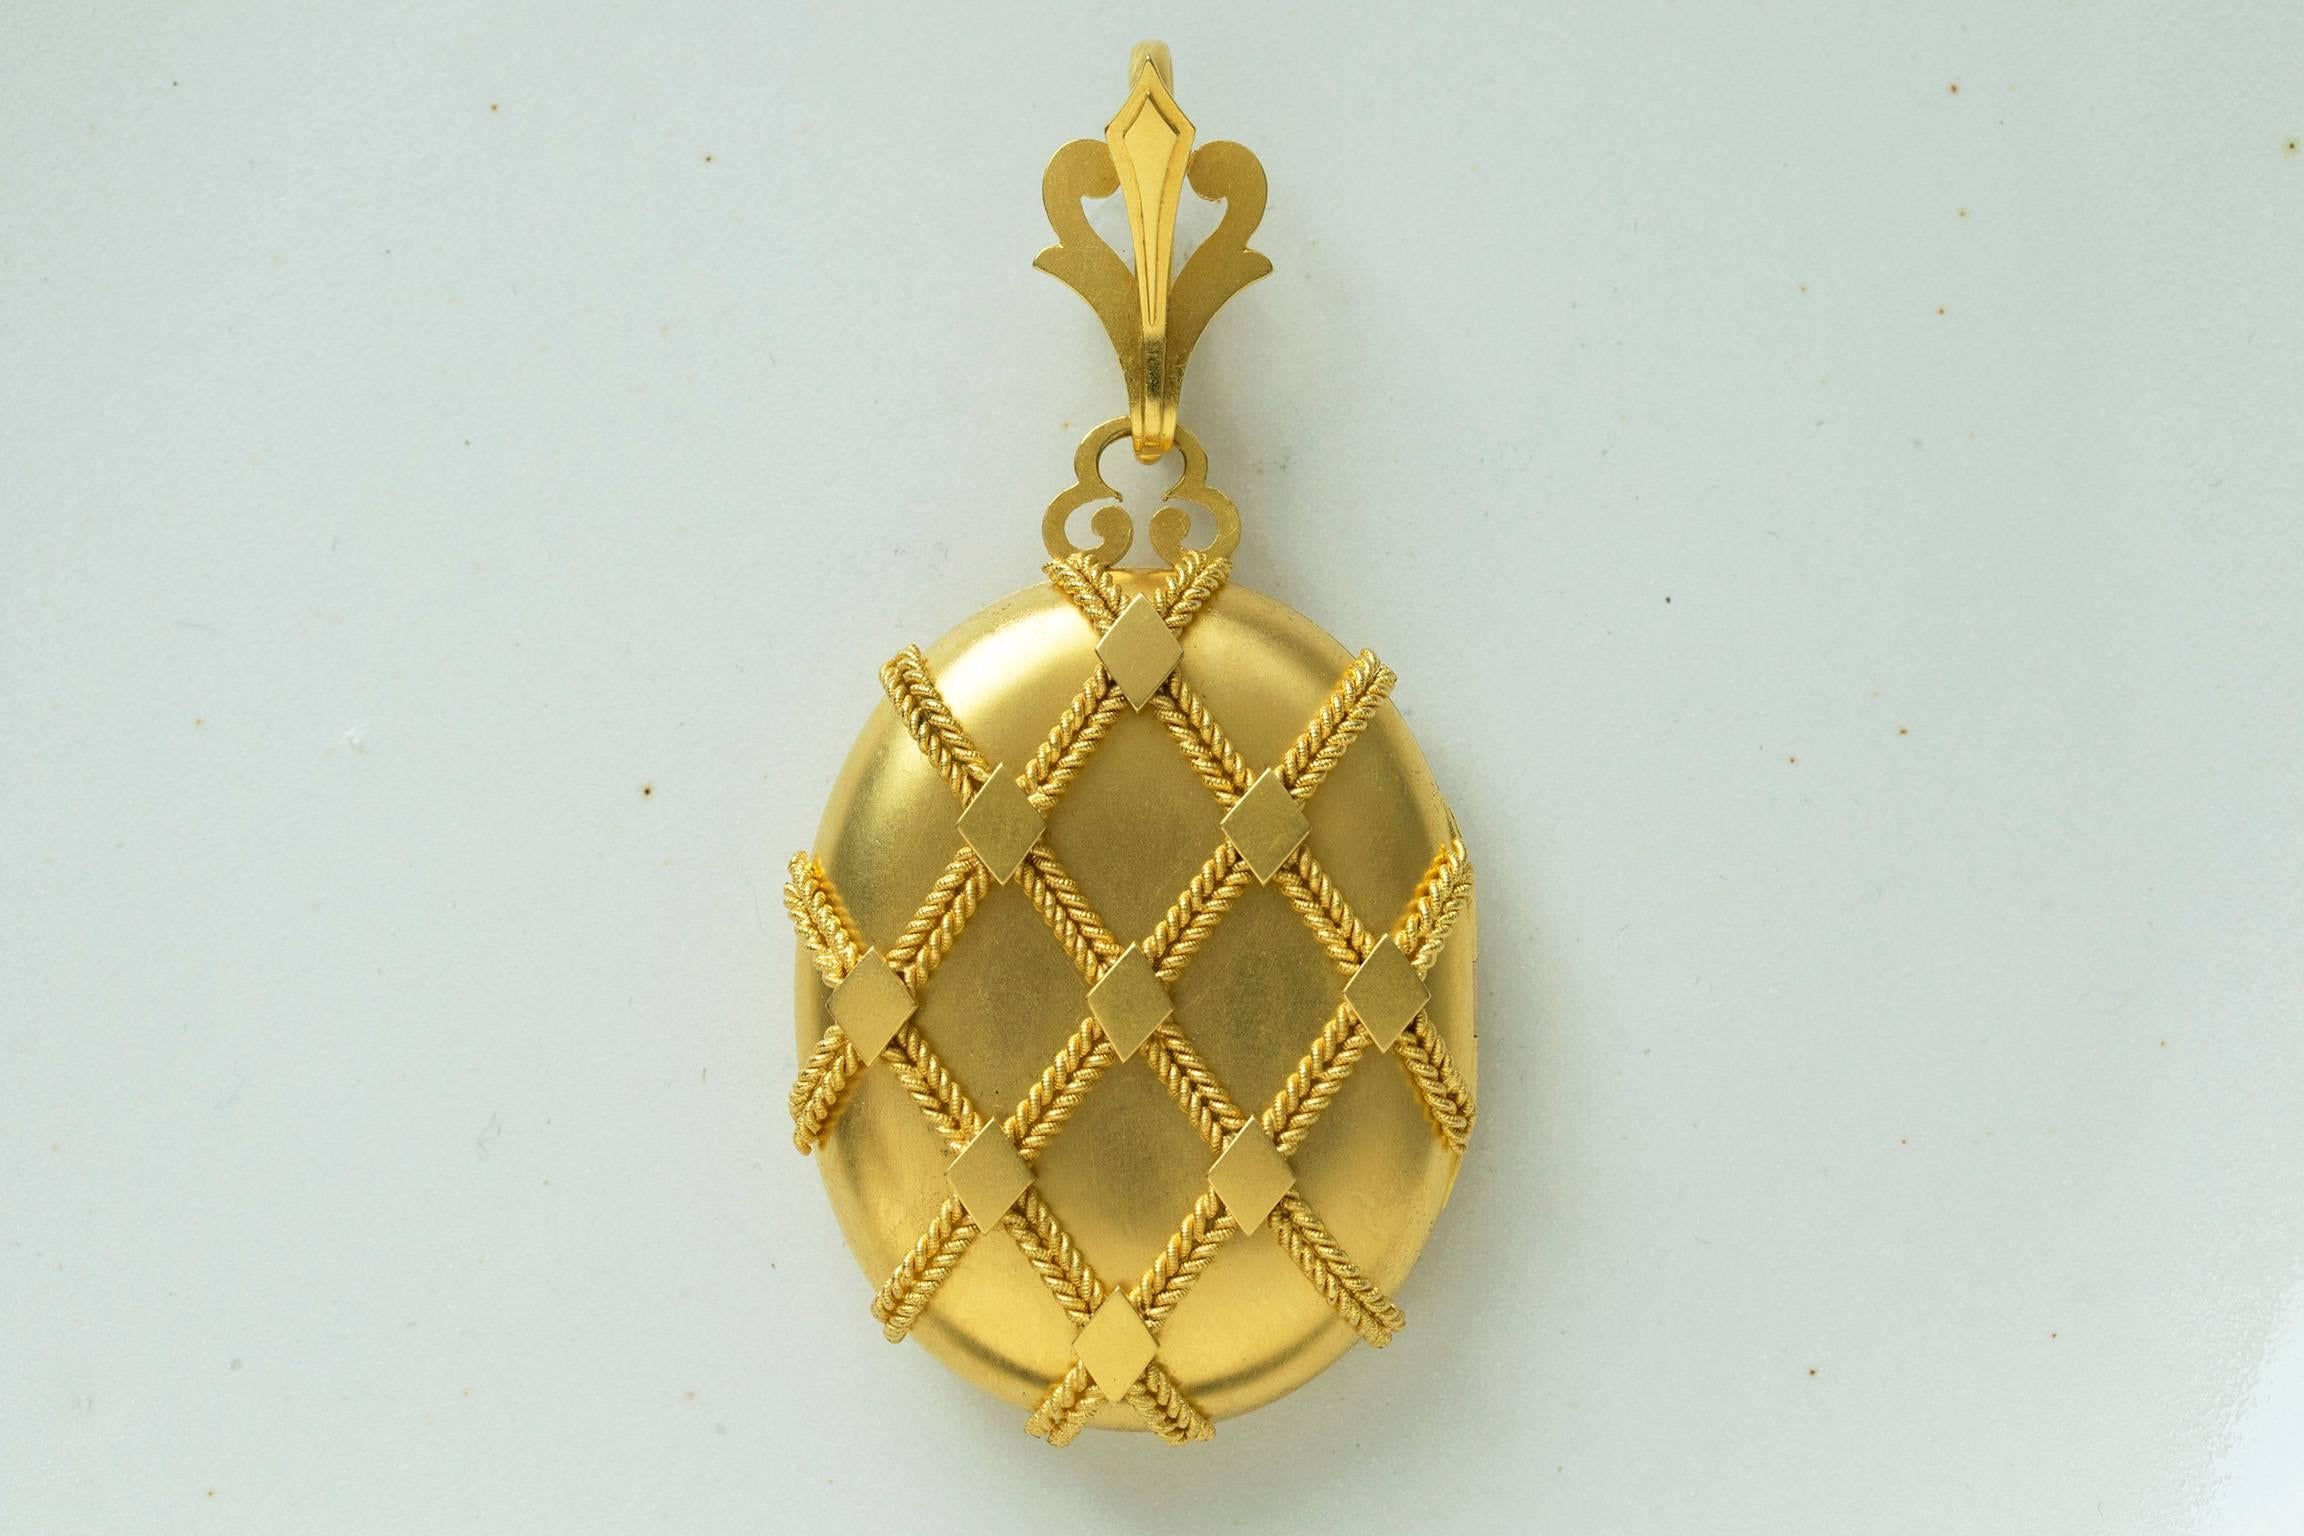 C.1860. A gorgeous fine quality Victorian 15k gold locket. The locket is designed with the crisscross rope motif and diamond pattern. Beautifully detailed original bale makes the locket more special. There are two photo compartments inside. The